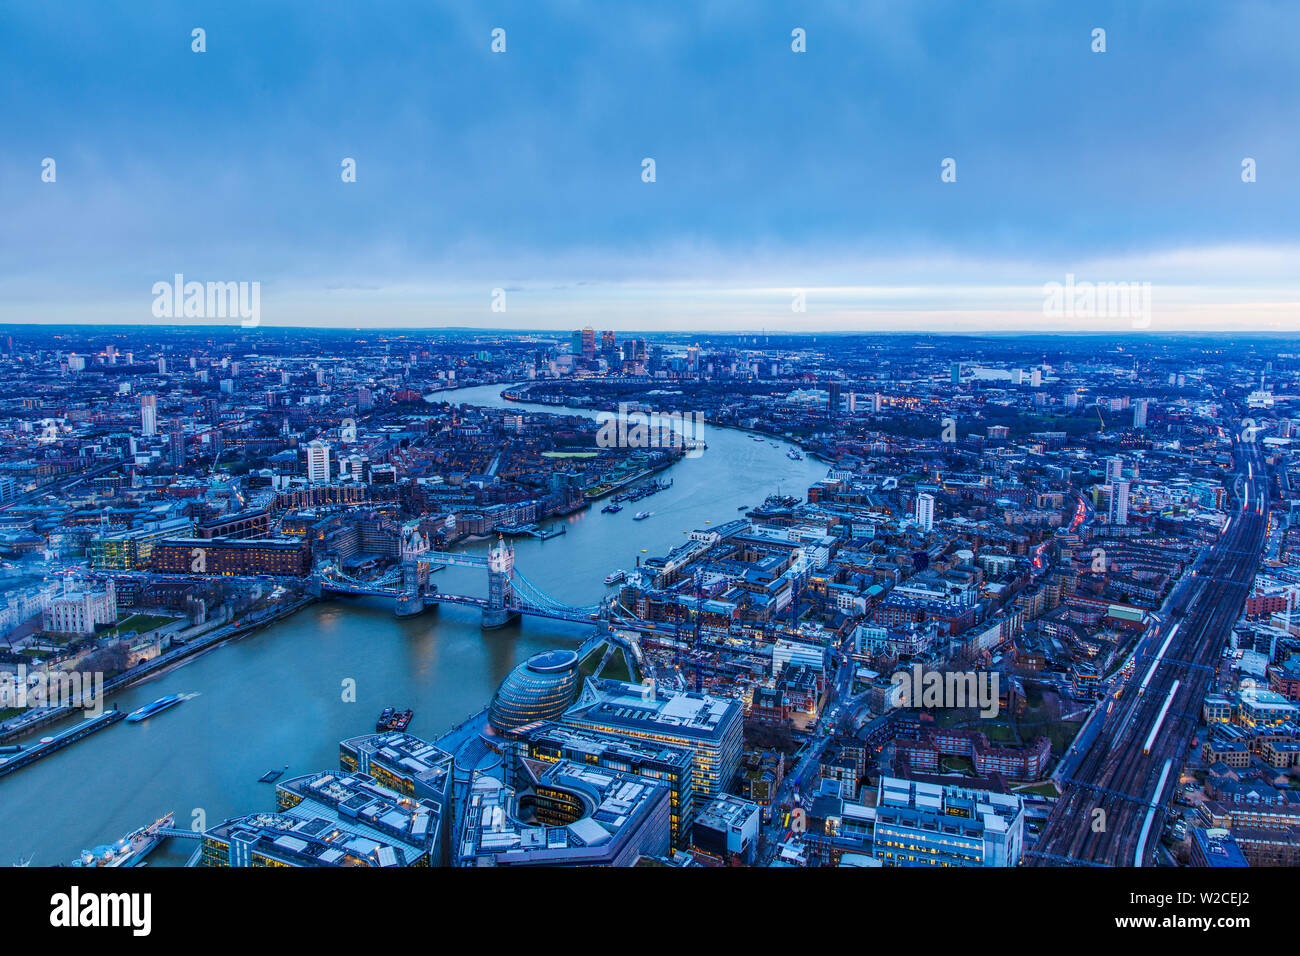 UK, England, London, View of London from The Shard, looking over Tower Bridge to Canary Wharf Stock Photo